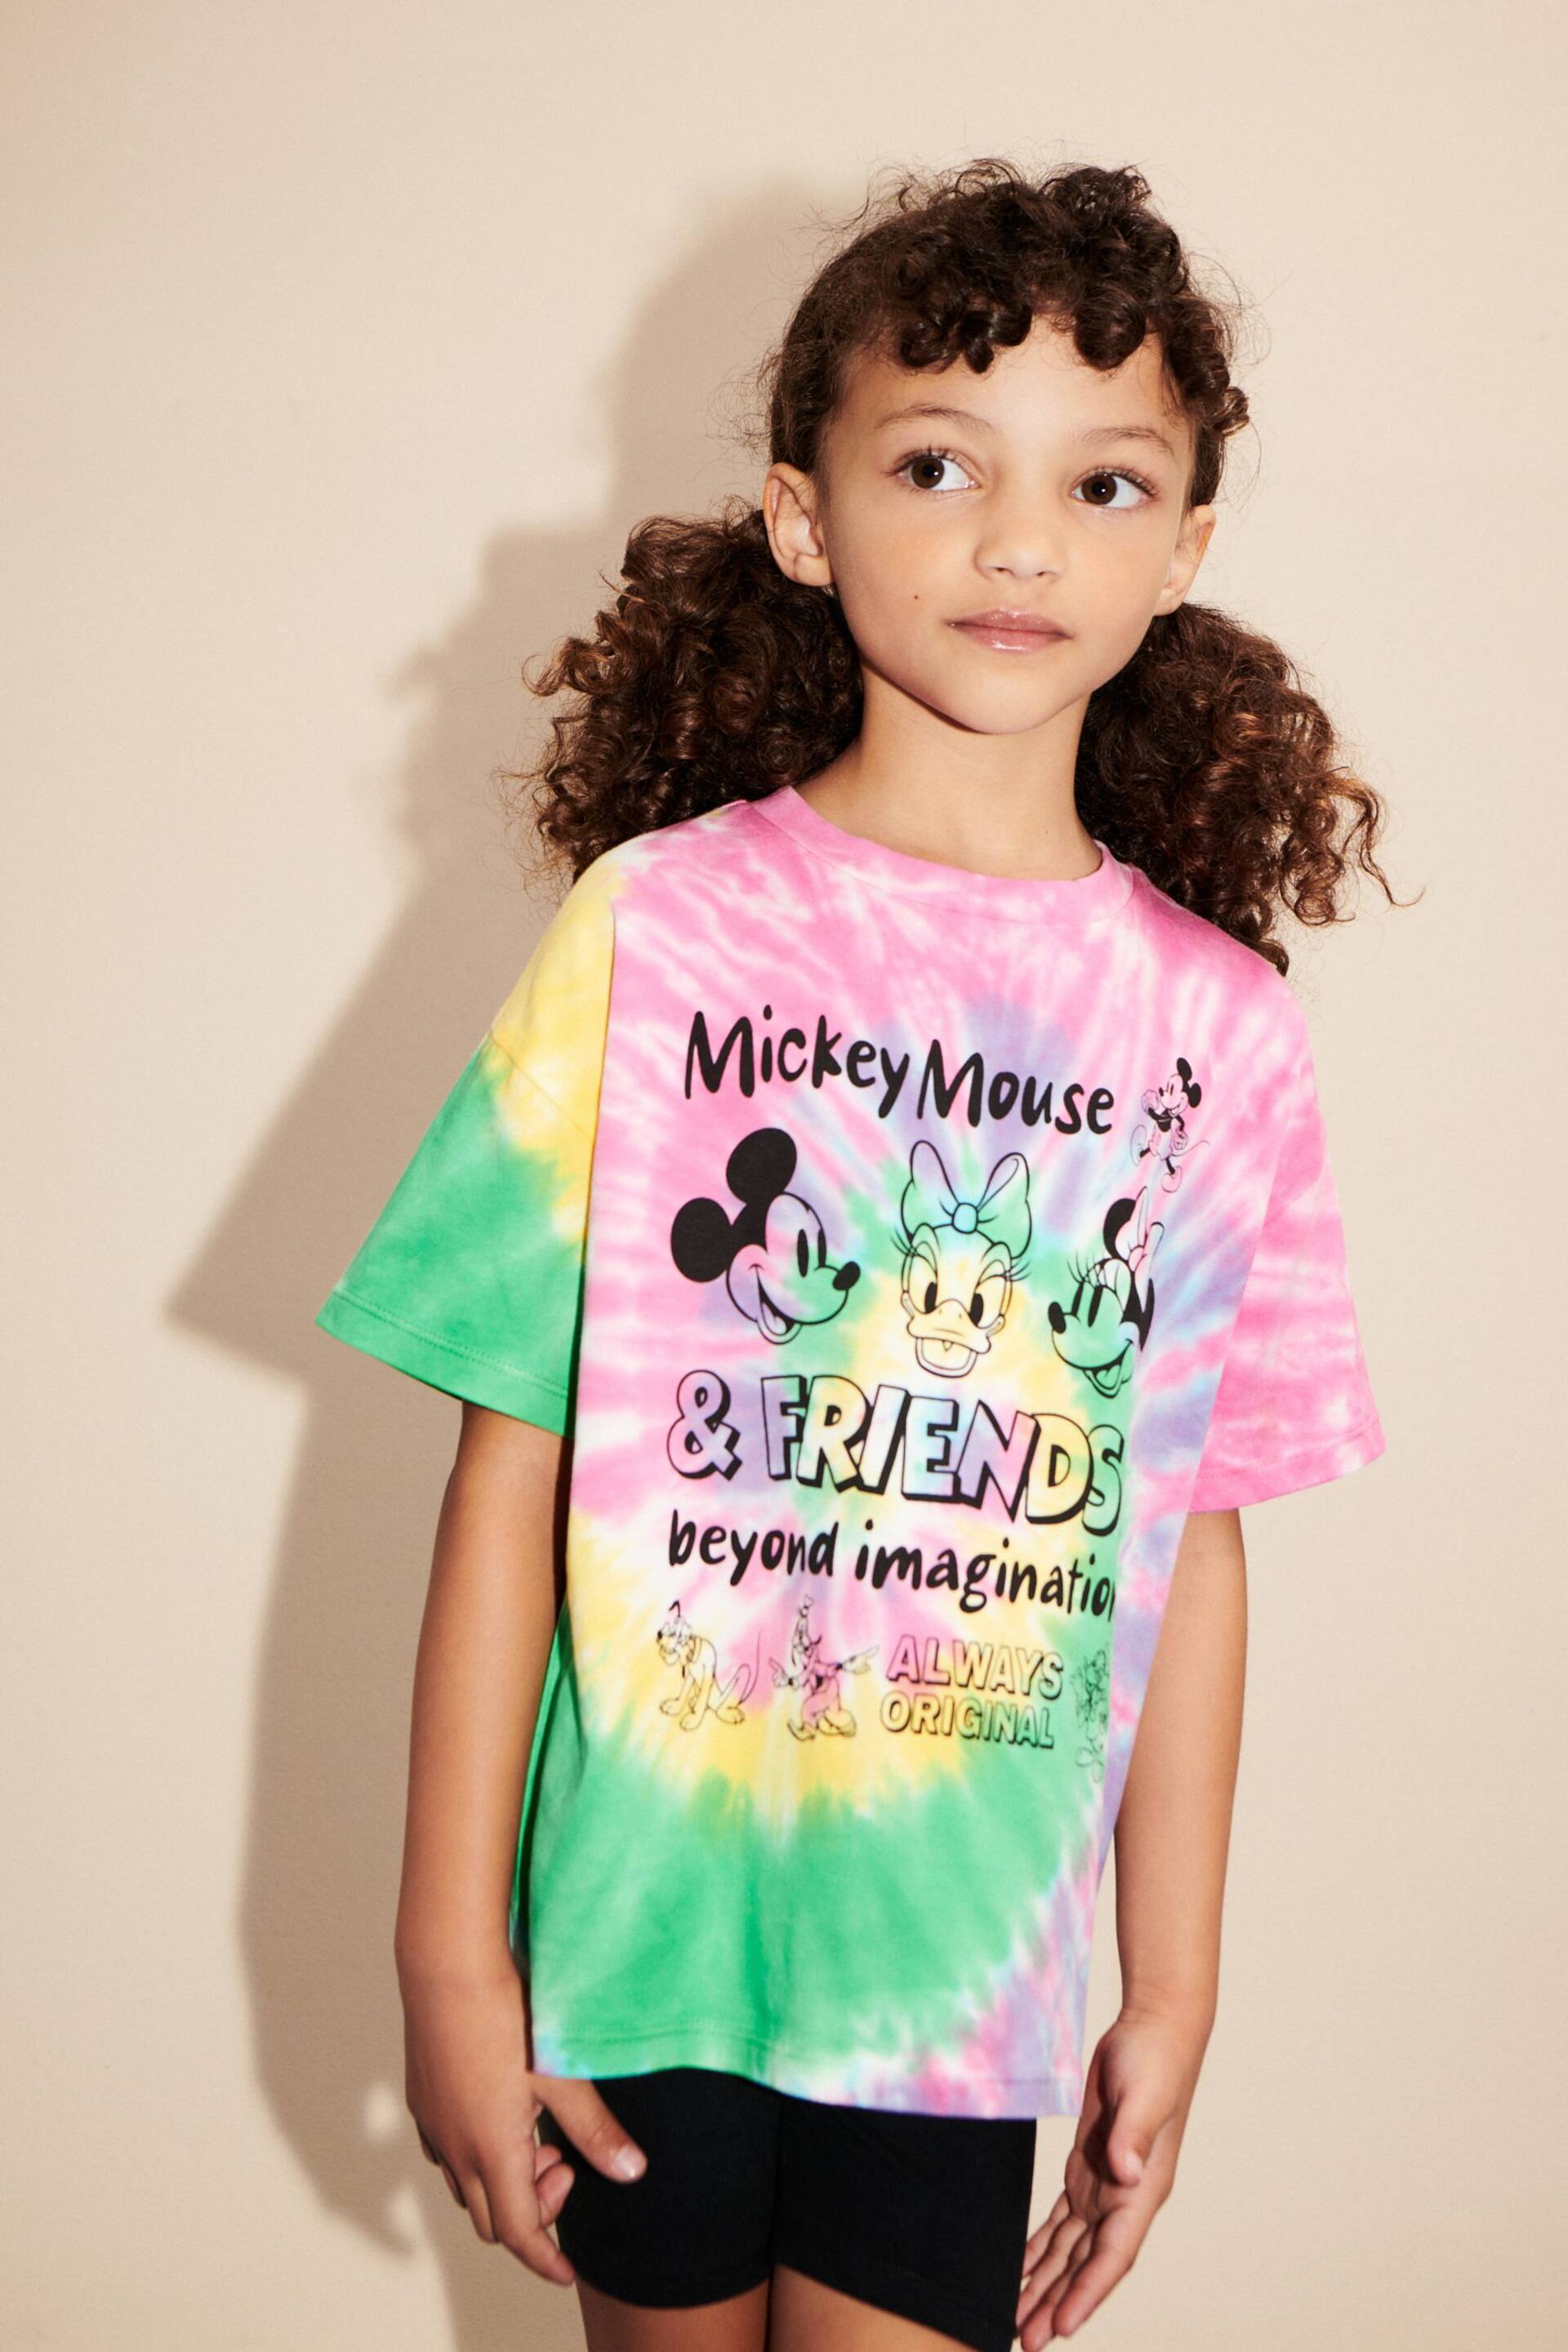 Rainbow Tie Dye Oversized Sequin Minnie Mouse License T-Shirt (3-16yrs) - Image 1 of 6